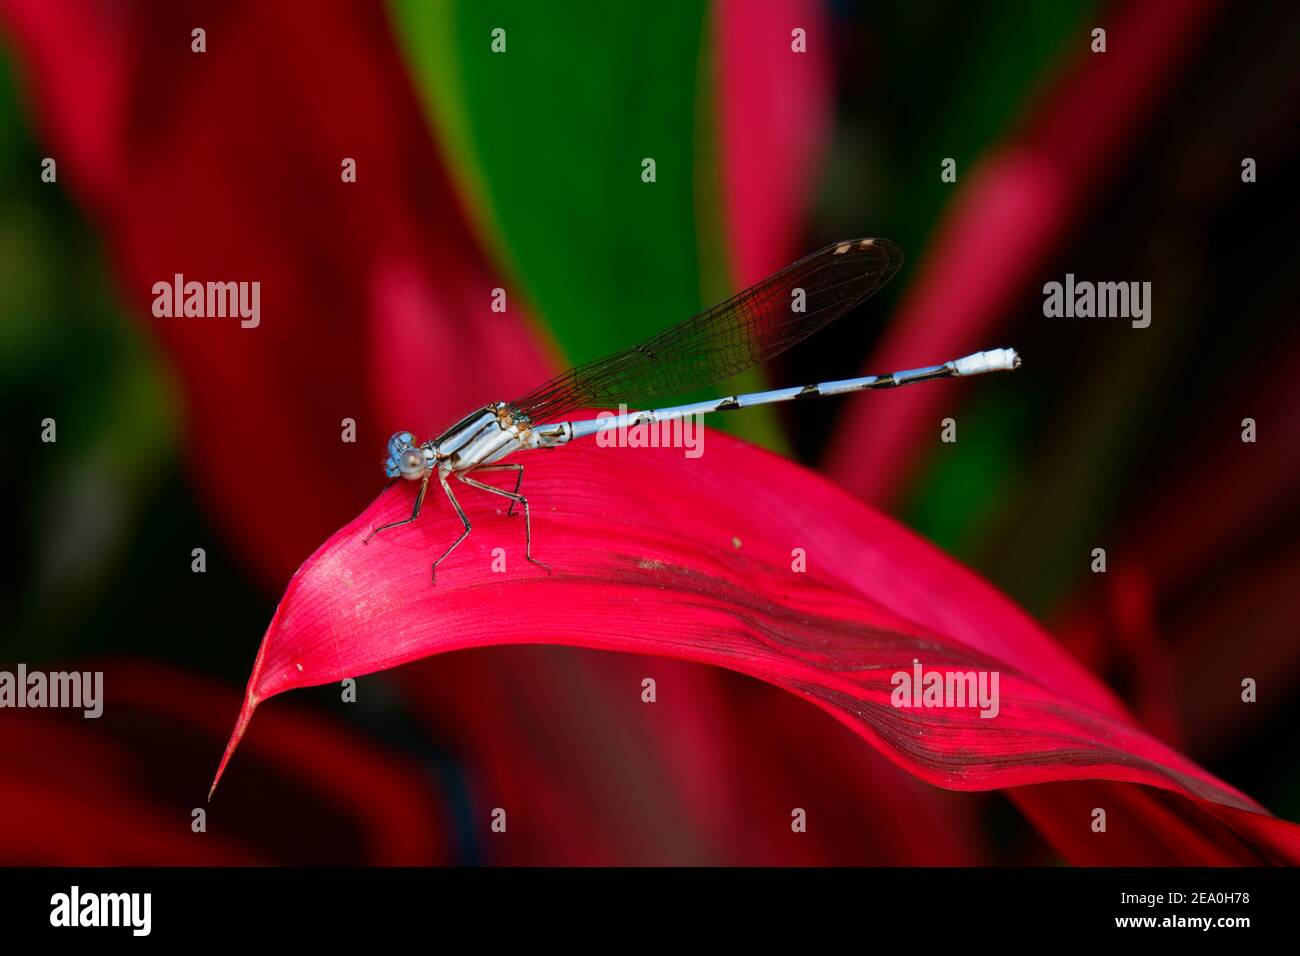 A blue damselfly, suborder Zygoptera, perched on a red leaf. Stock Photo